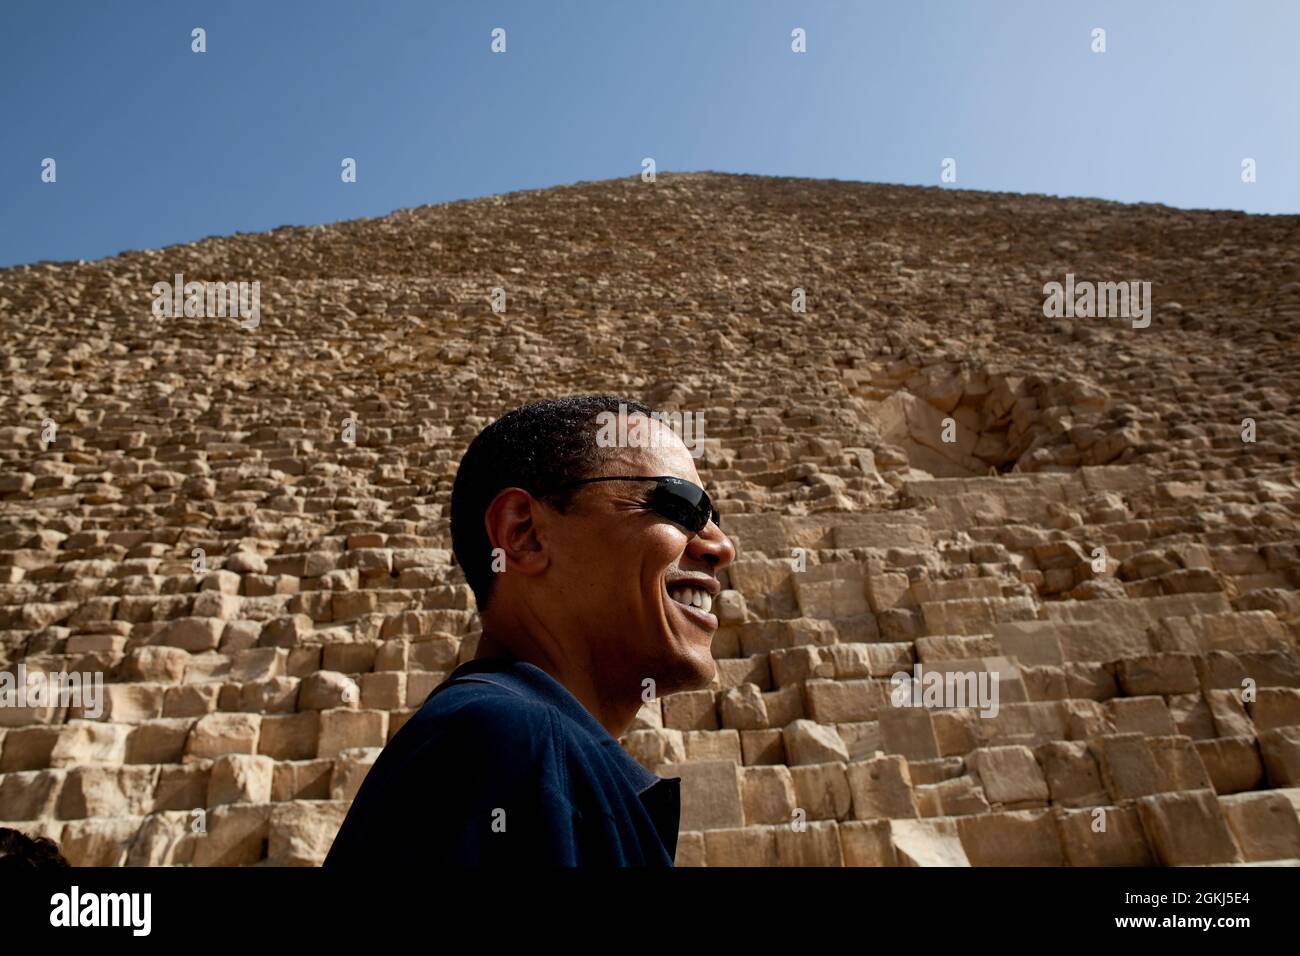 President Barack Obama tours the Pyramids of Giza in Egypt on June 4, 2009. (Official White House photo by Pete Souza) This official White House photograph is being made available for publication by news organizations and/or for personal use printing by the subject(s) of the photograph. The photograph may not be manipulated in any way or used in materials, advertisements, products, or promotions that in any way suggest approval or endorsement of the President, the First Family, or the White House. Stock Photo